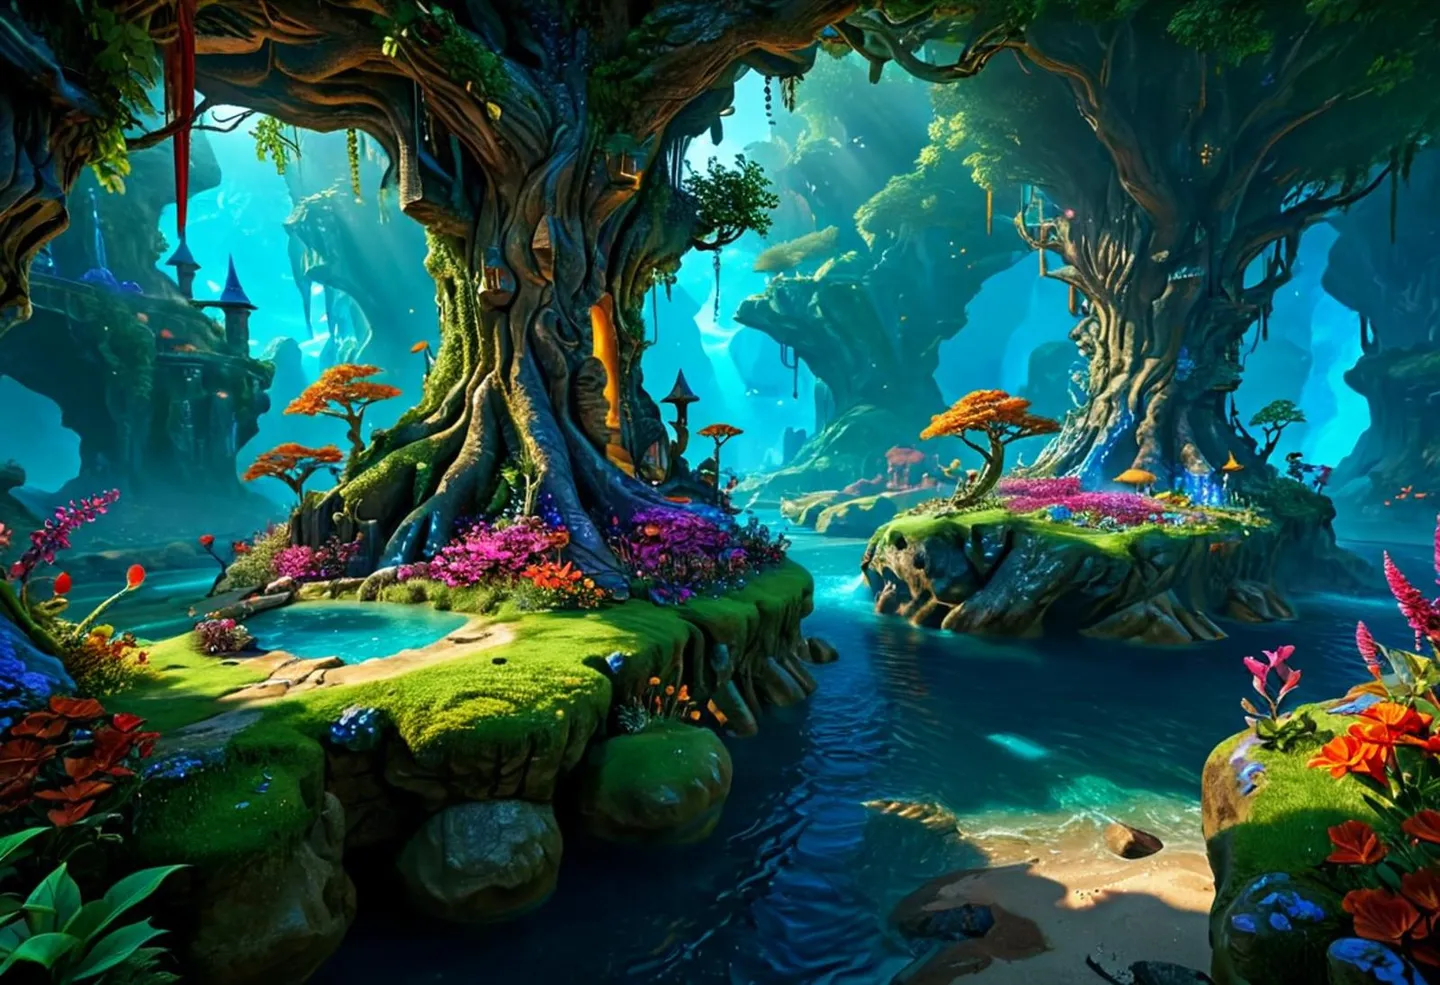 AI generated image using stable diffusion of a fantasy forest with gigantic, mystical trees, vibrant flowers, and a tranquil stream.